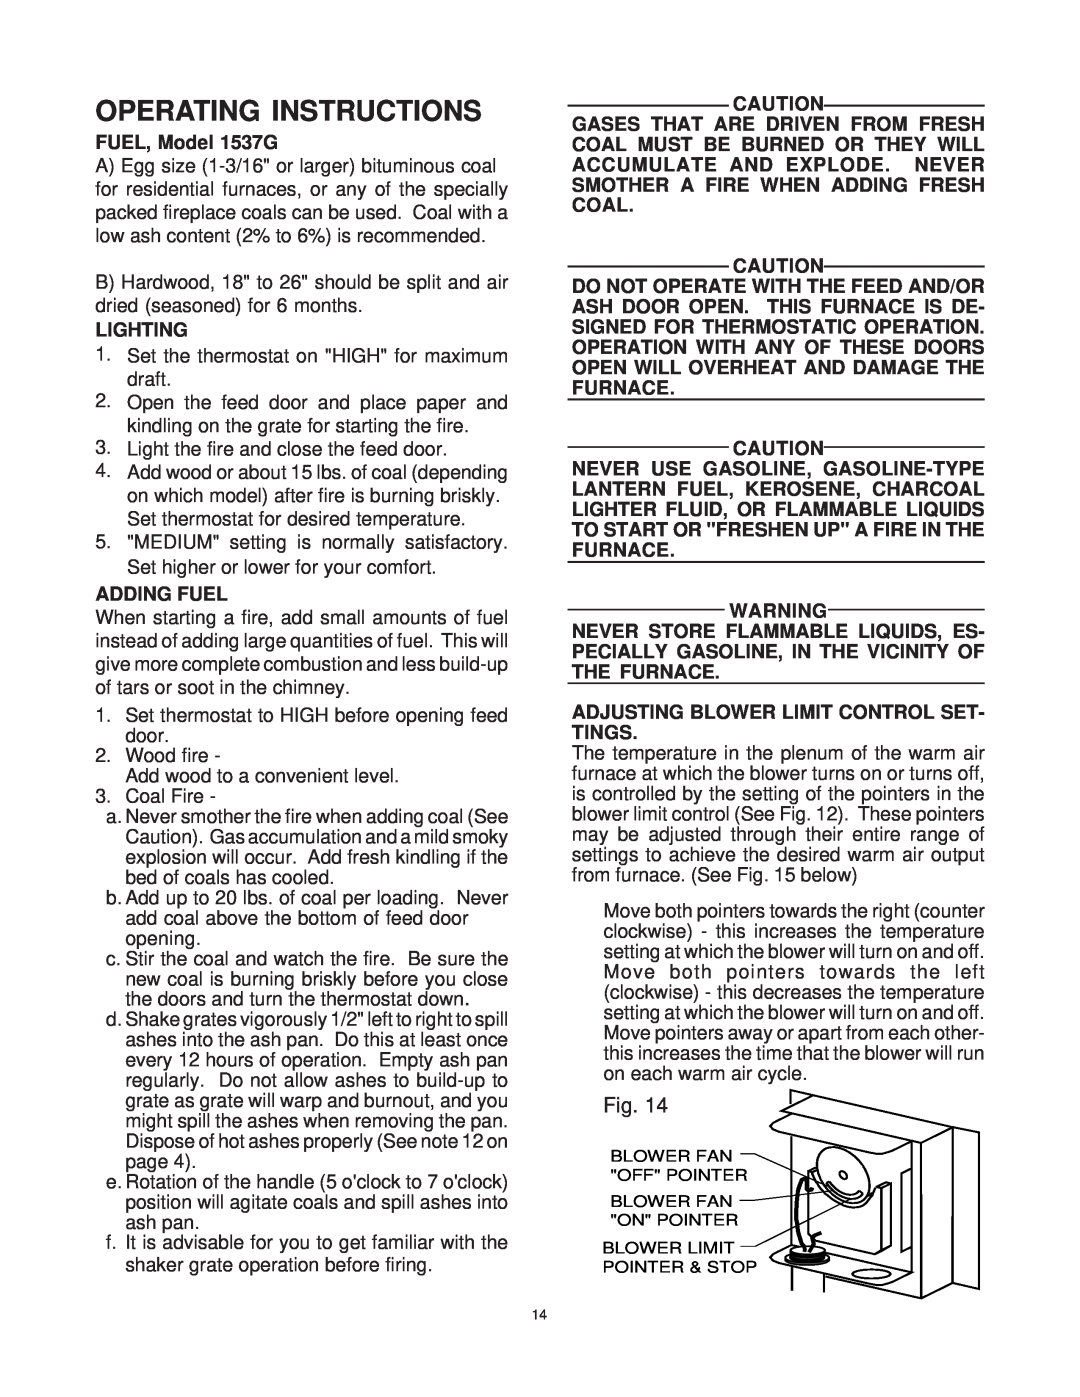 United States Stove 1537G owner manual Operating Instructions, Set the thermostat on HIGH for maximum draft, Coal Fire 